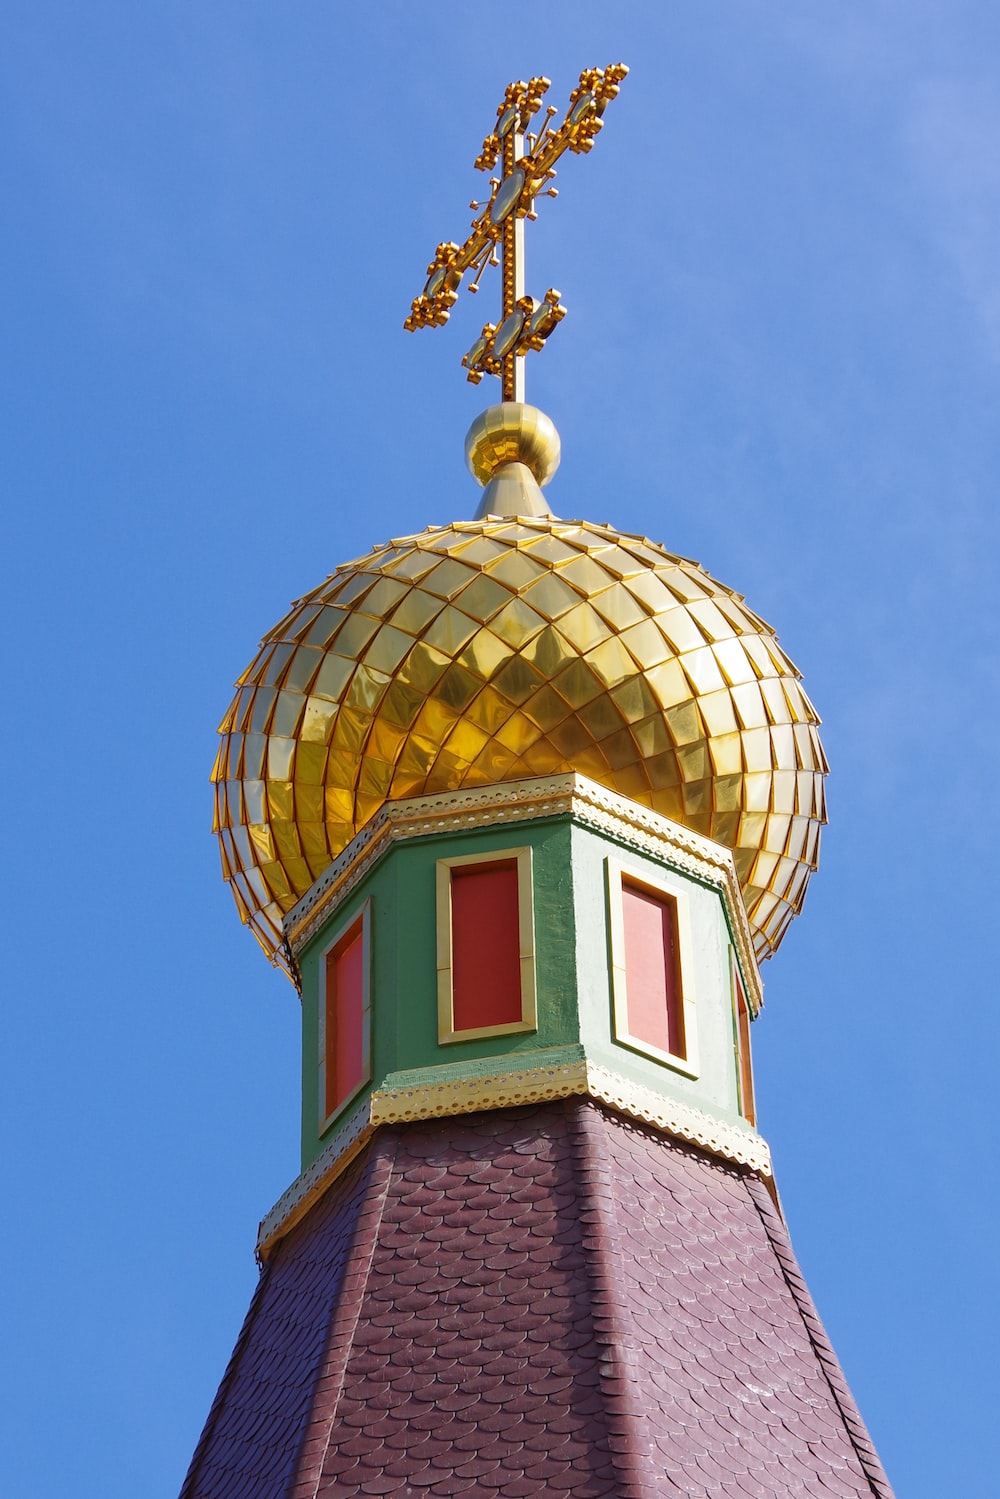 a gold dome on top of a building with a cross on top